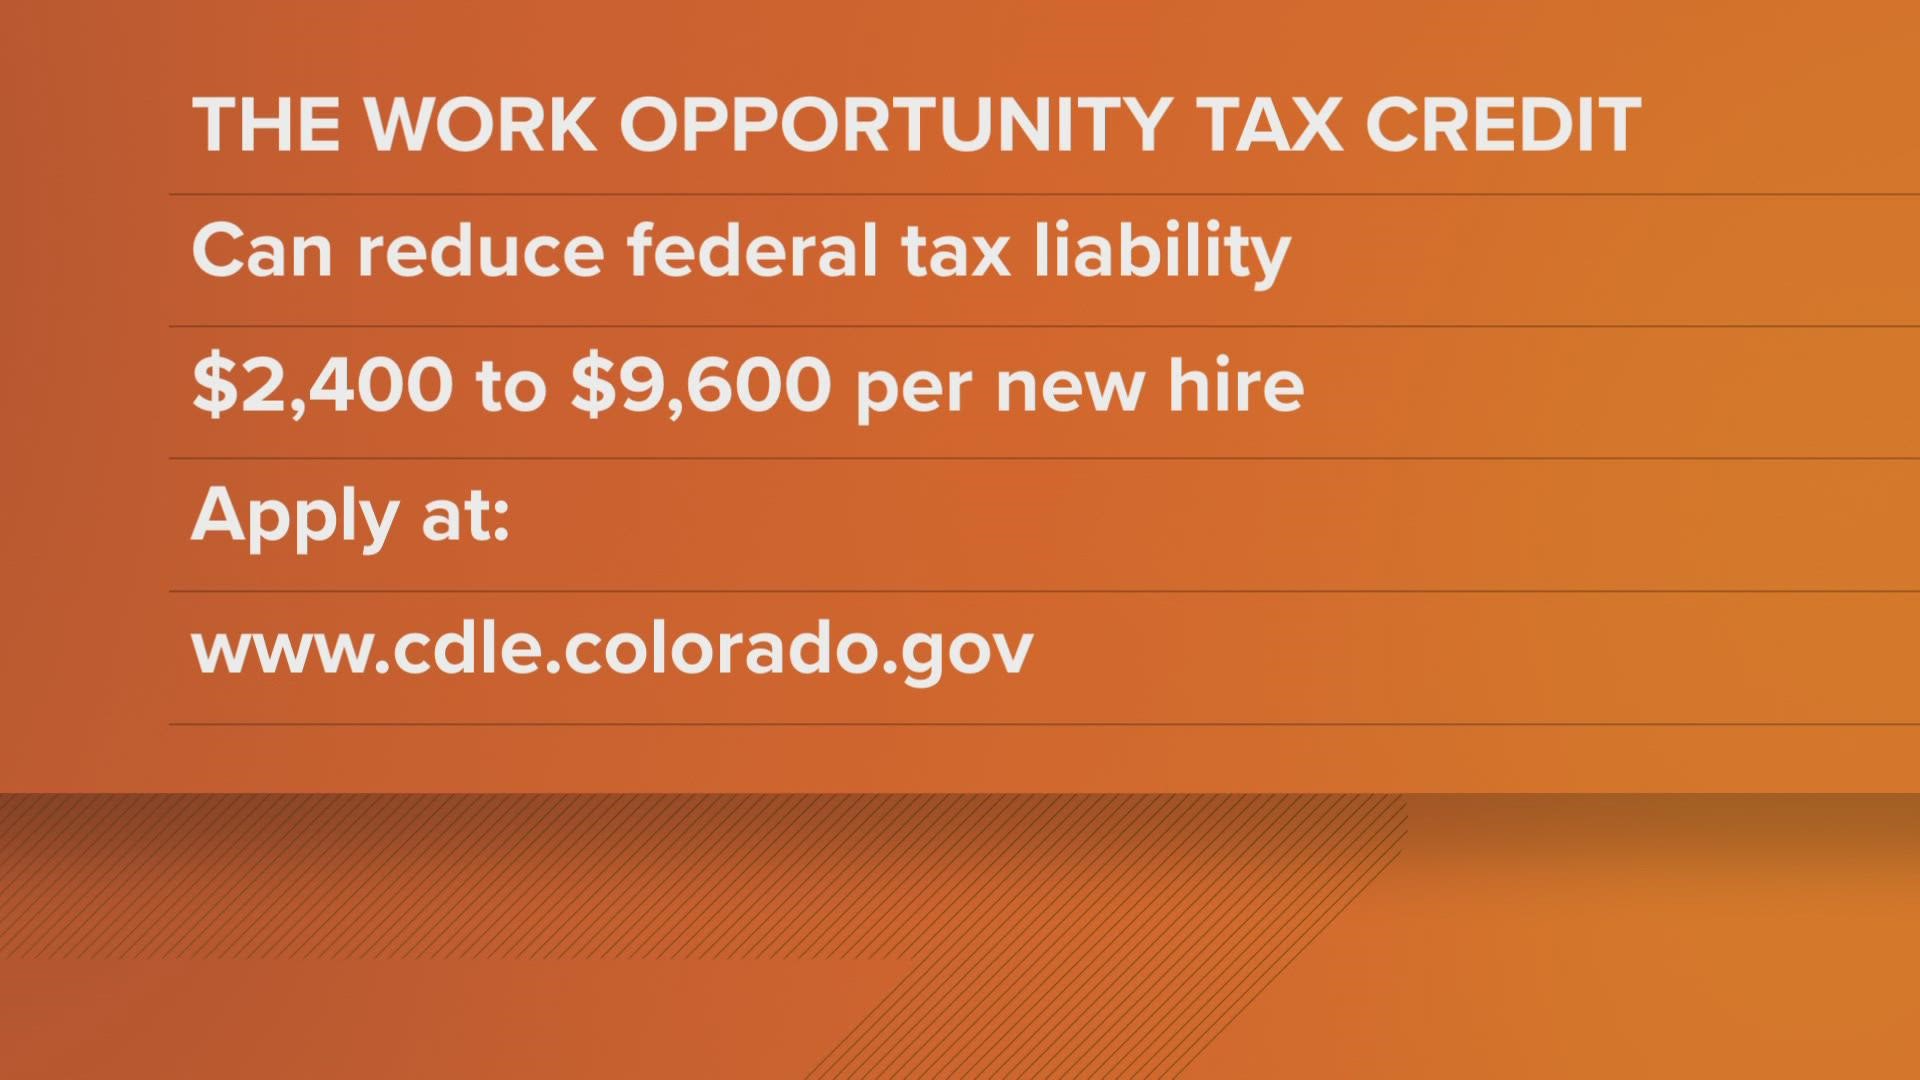 9NEWS Legal Analyst Whitney Traylor discusses the Work Opportunity Tax Credit, a federal tax credit that encourages employers to hire targeted groups of job seekers.